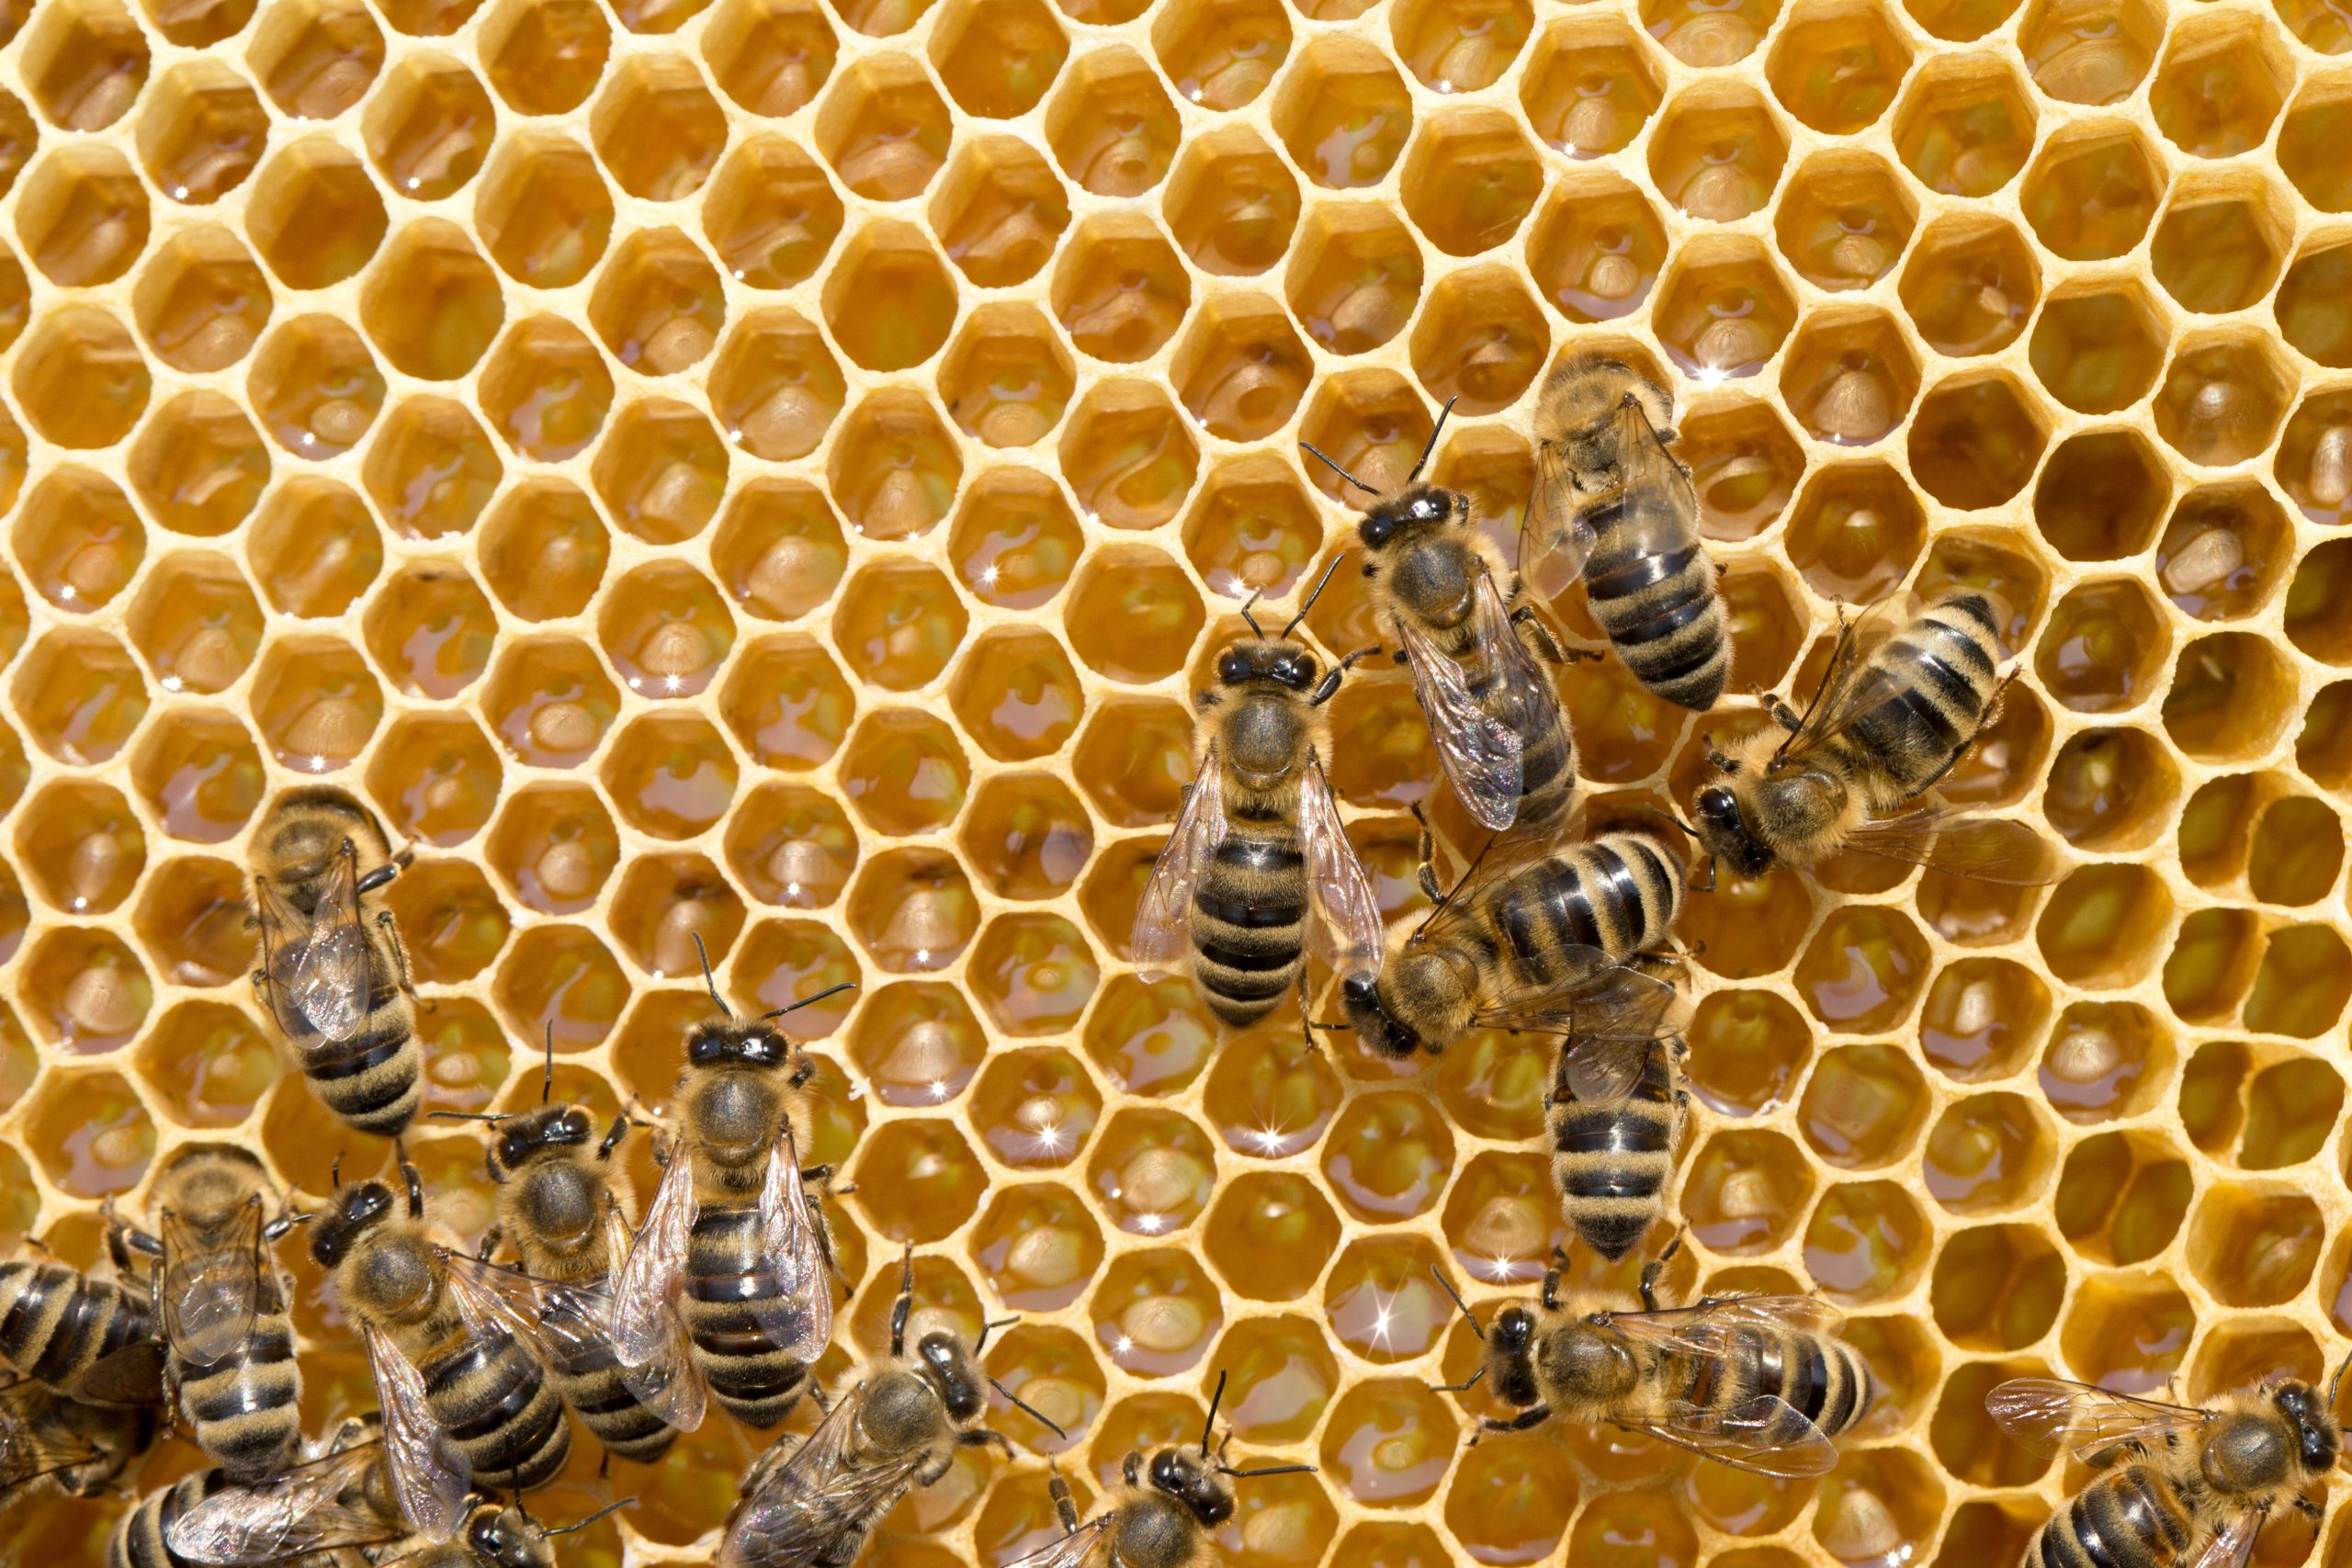 Colony Collapse Disorder Hits England Honeybees Very Hard